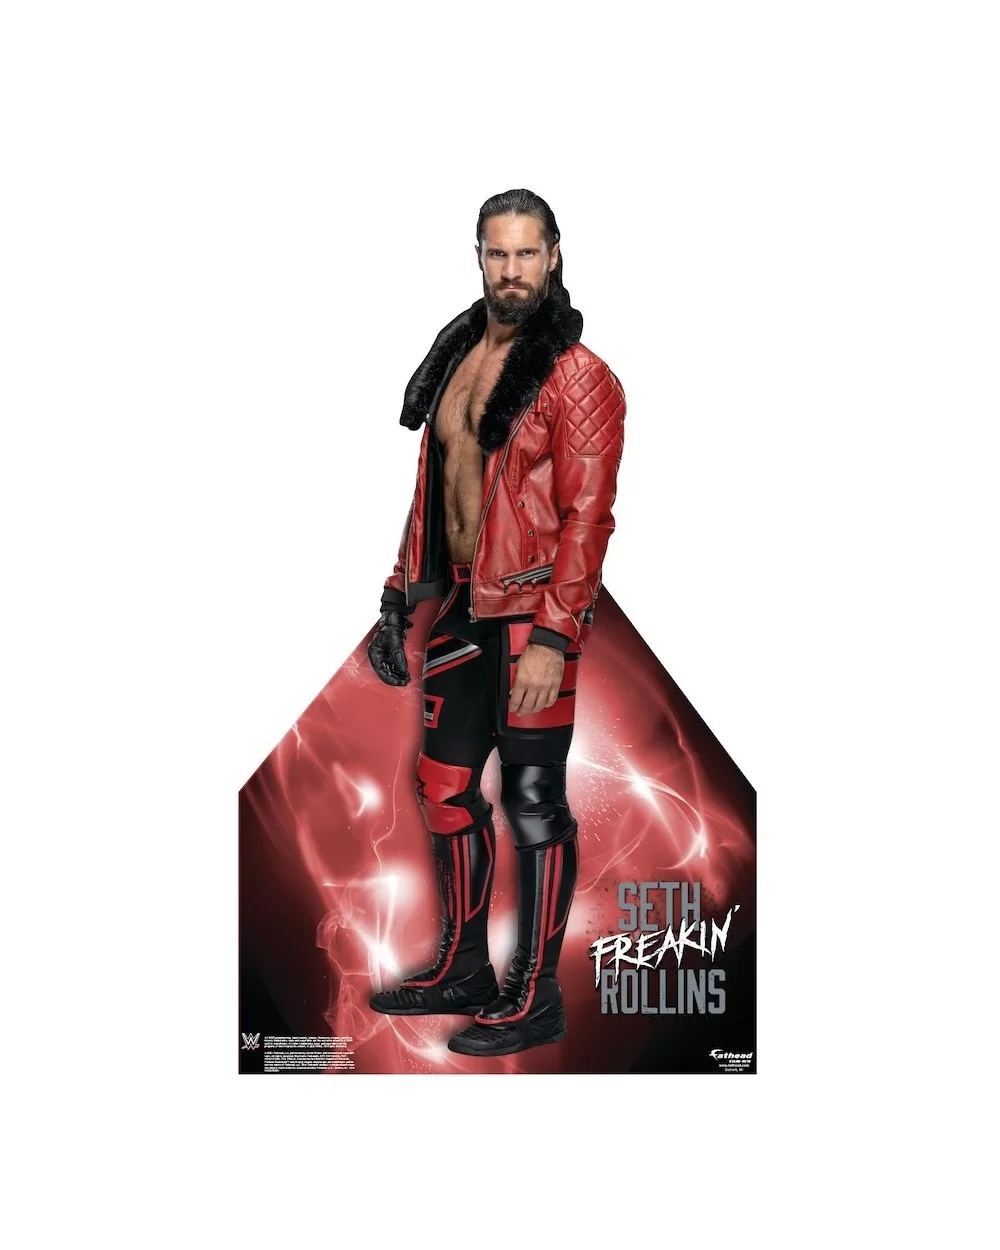 Fathead Seth "Freakin" Rollins Life-Size Foam Core Stand Out $44.80 Home & Office